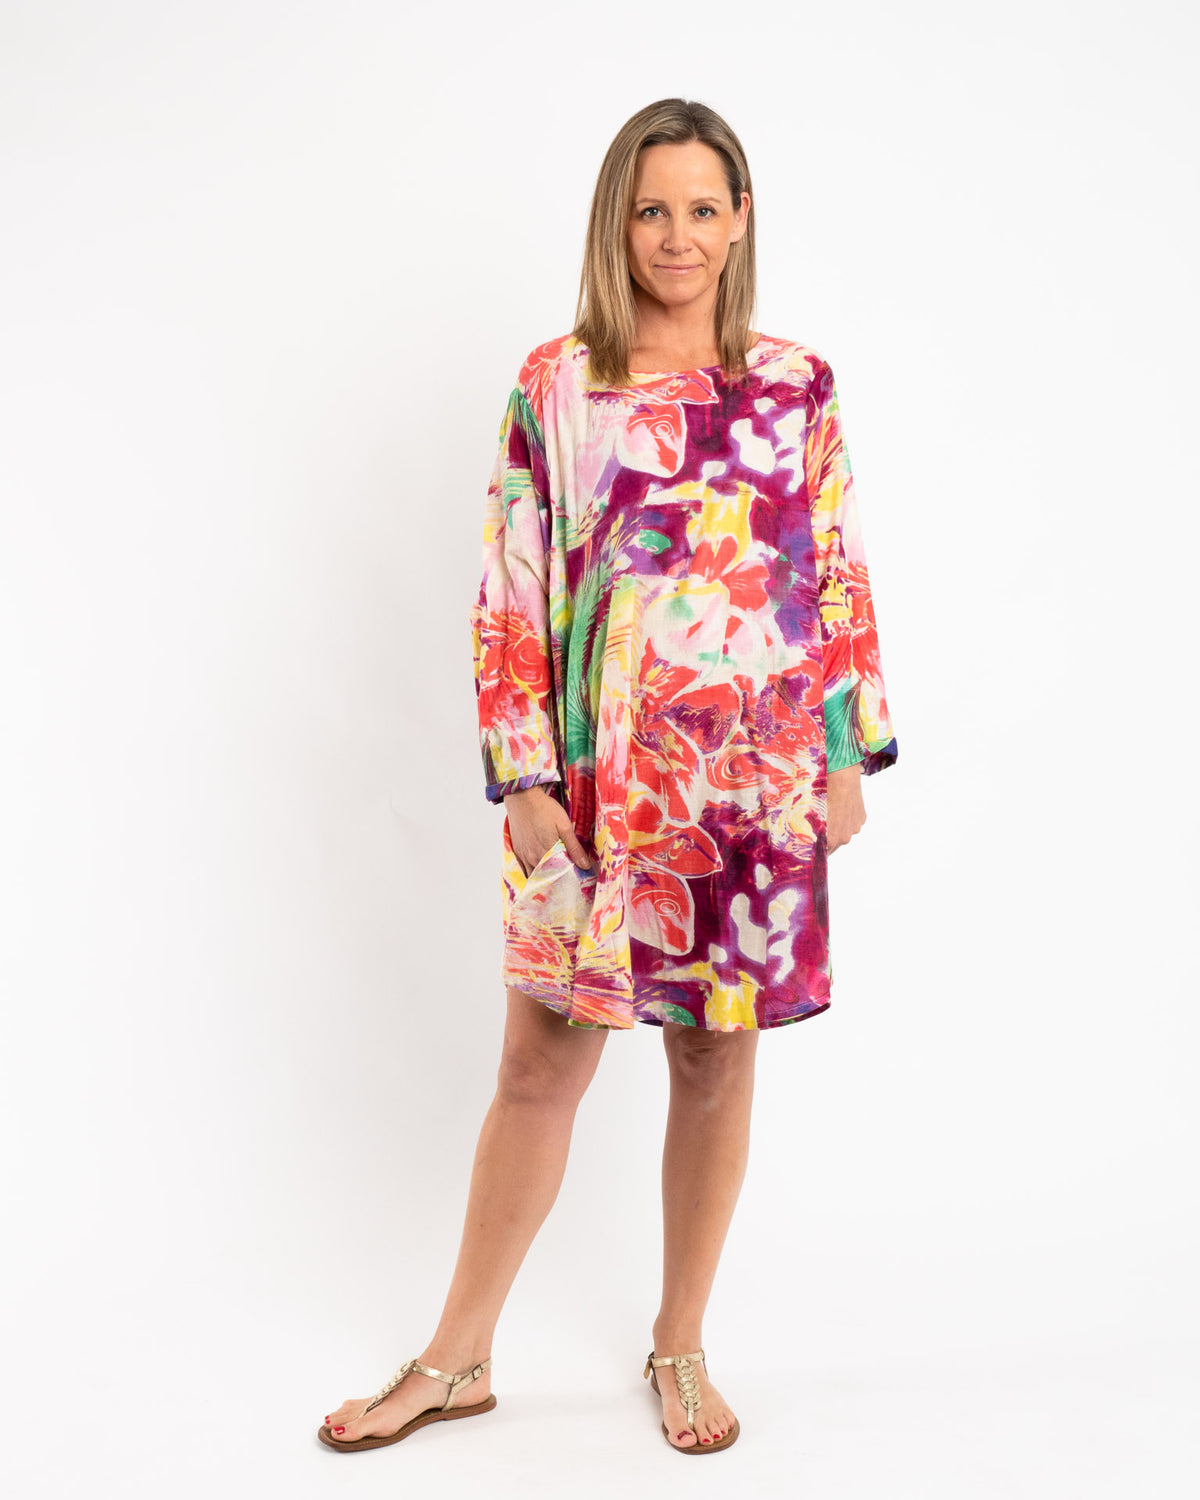 Free Size Summer Dress in Abstract Swirl